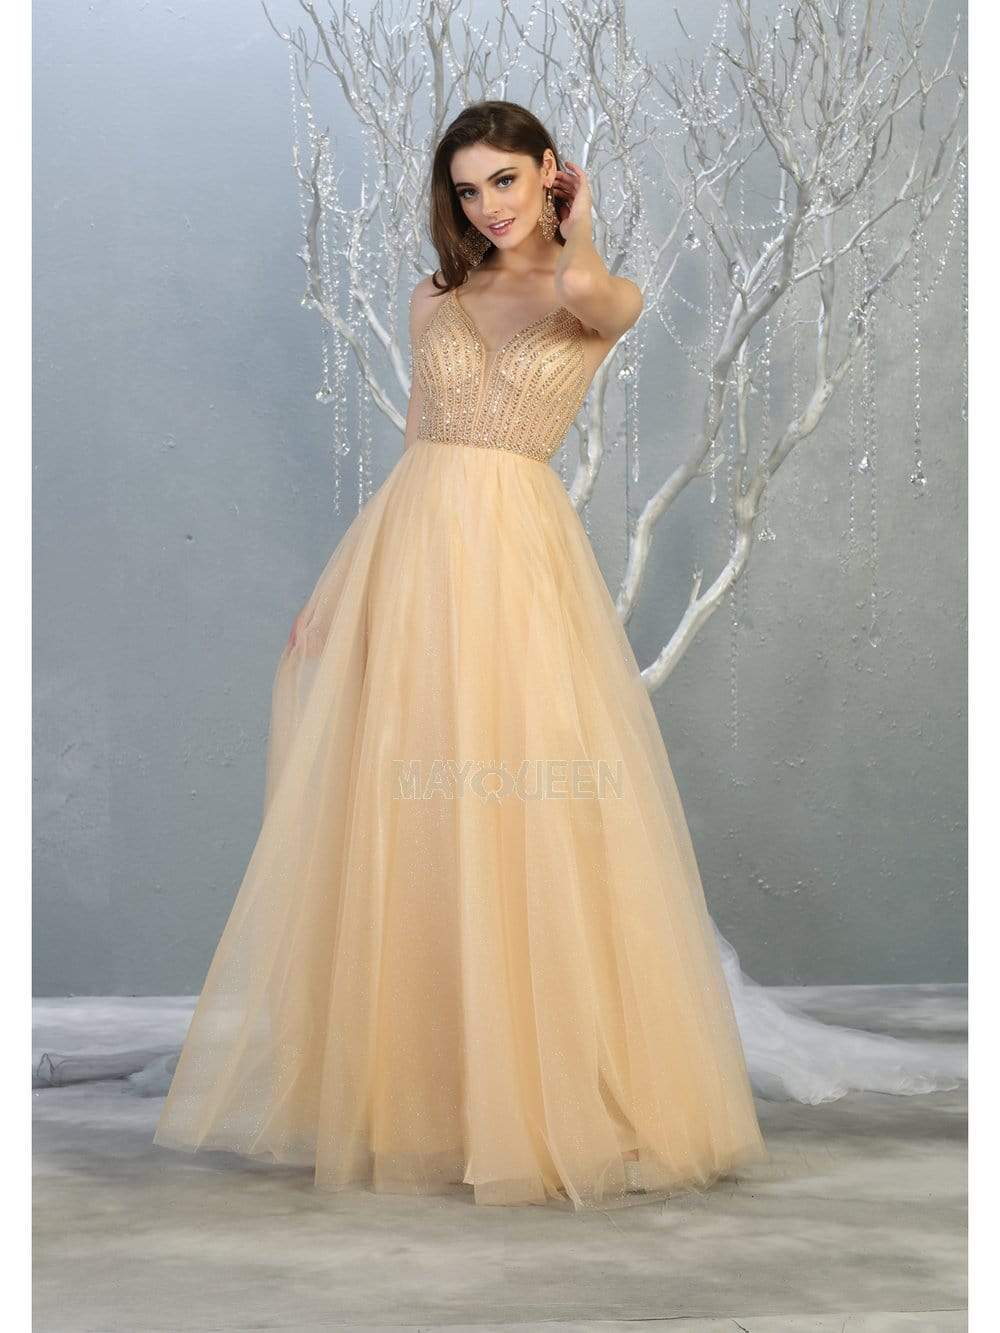 May Queen - MQ1812 Beaded Plunging V-Neck A-Line Dress Prom Dresses 4 / Champagne